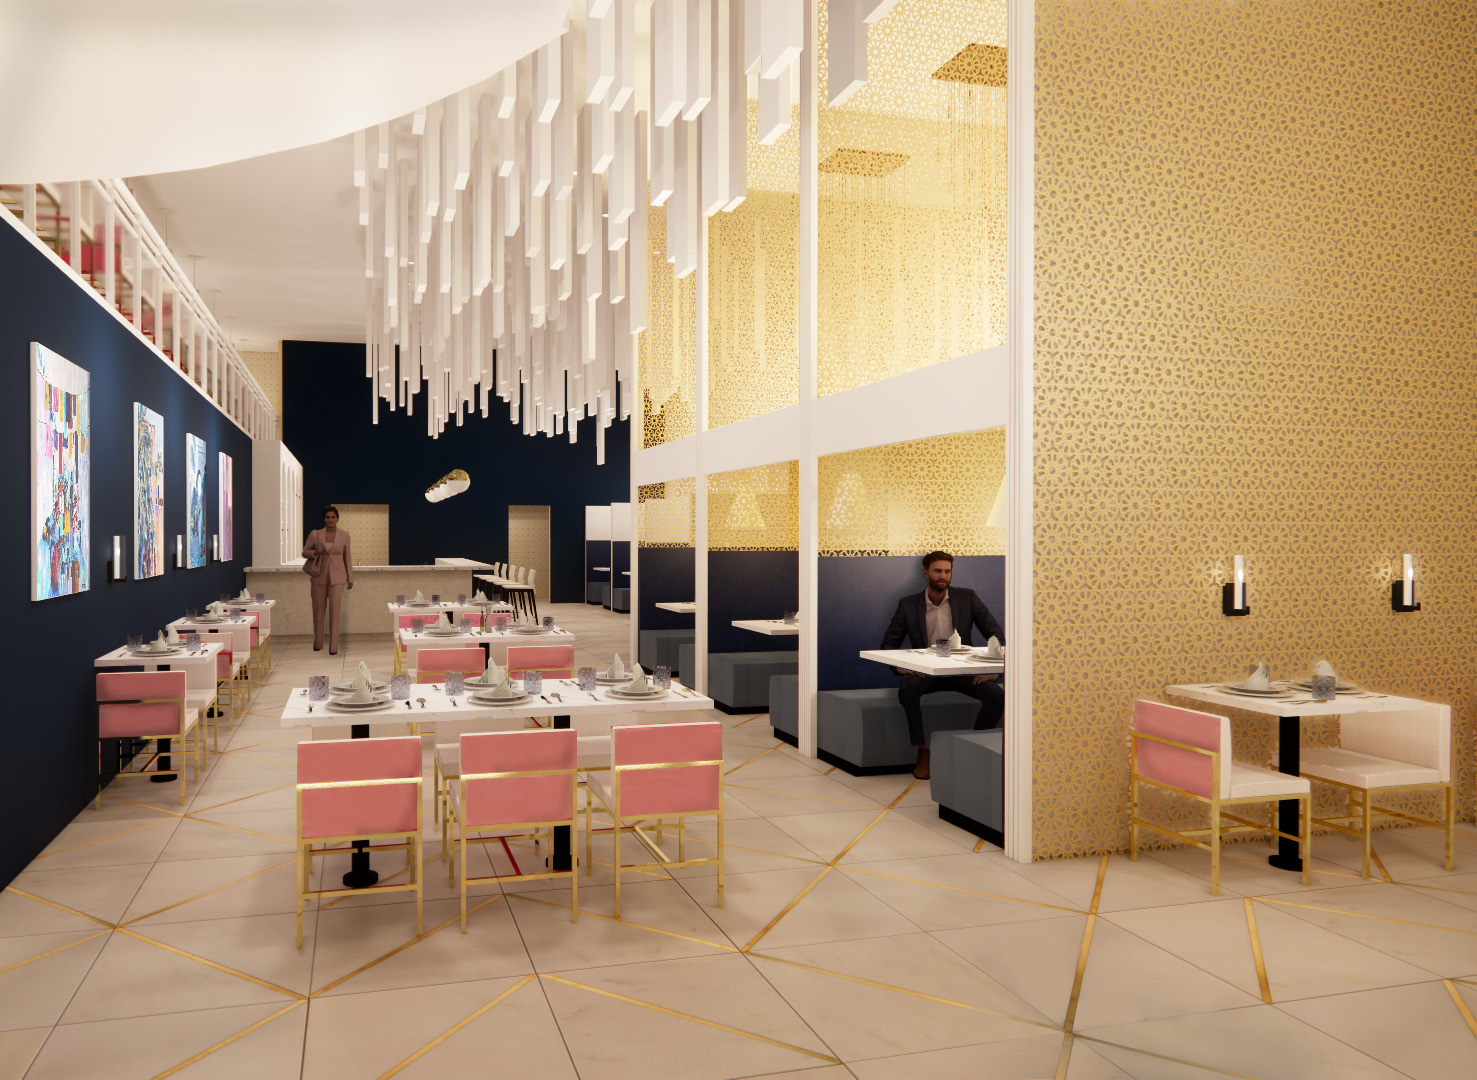 Computer generated rendering of a restaurant dining area with booth and table seating and an overhead chandelier.